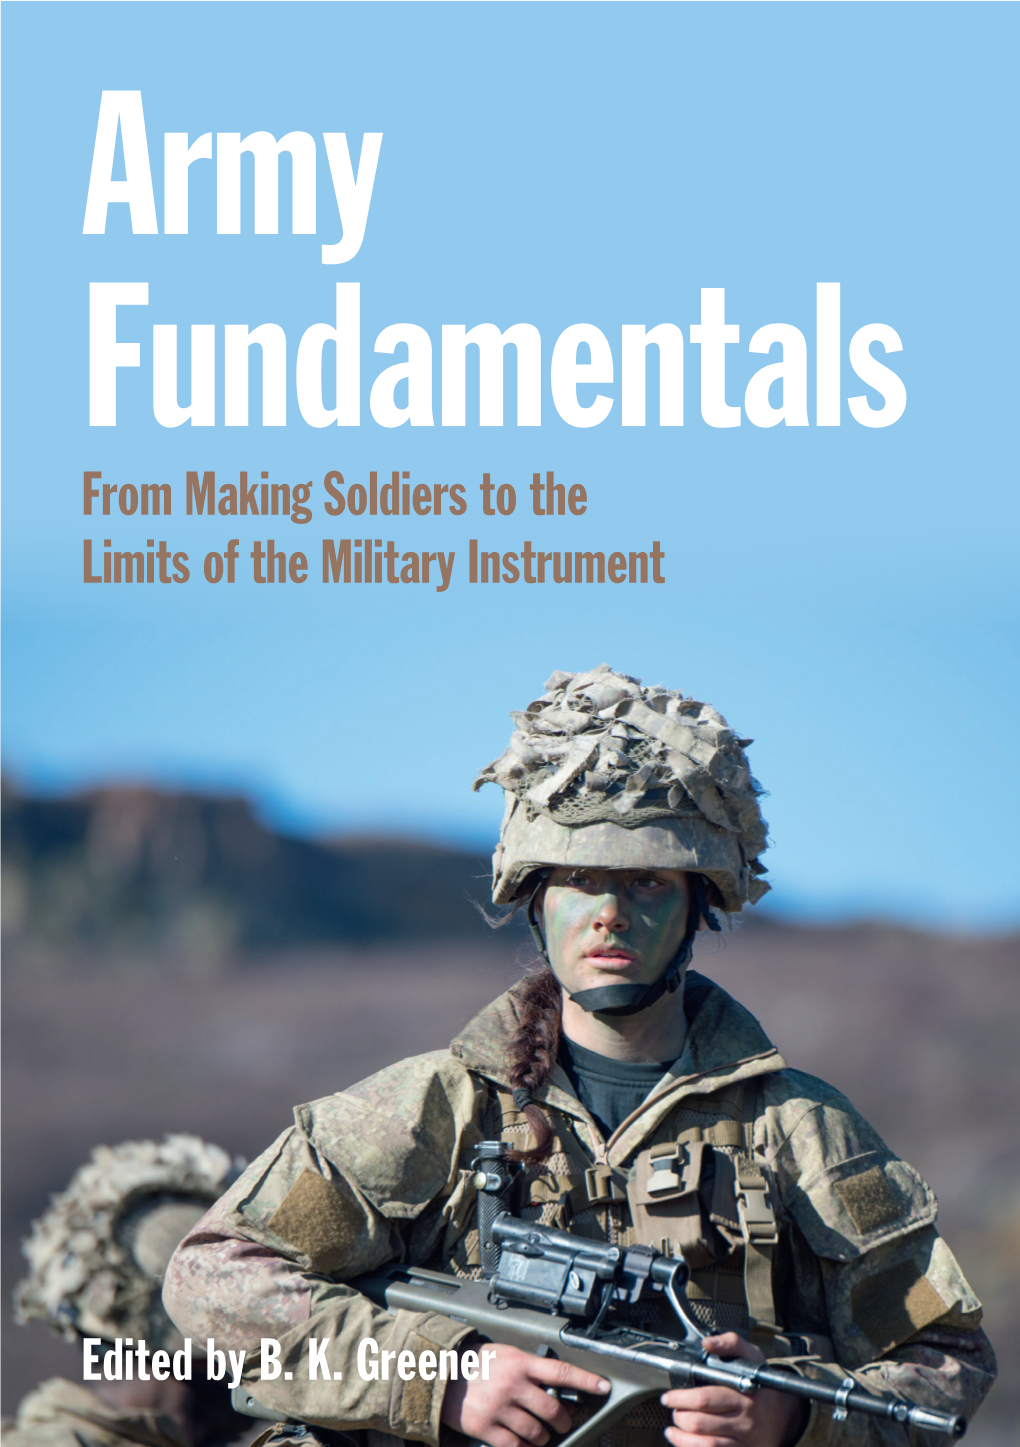 From Making Soldiers to the Limits of the Military Instrument